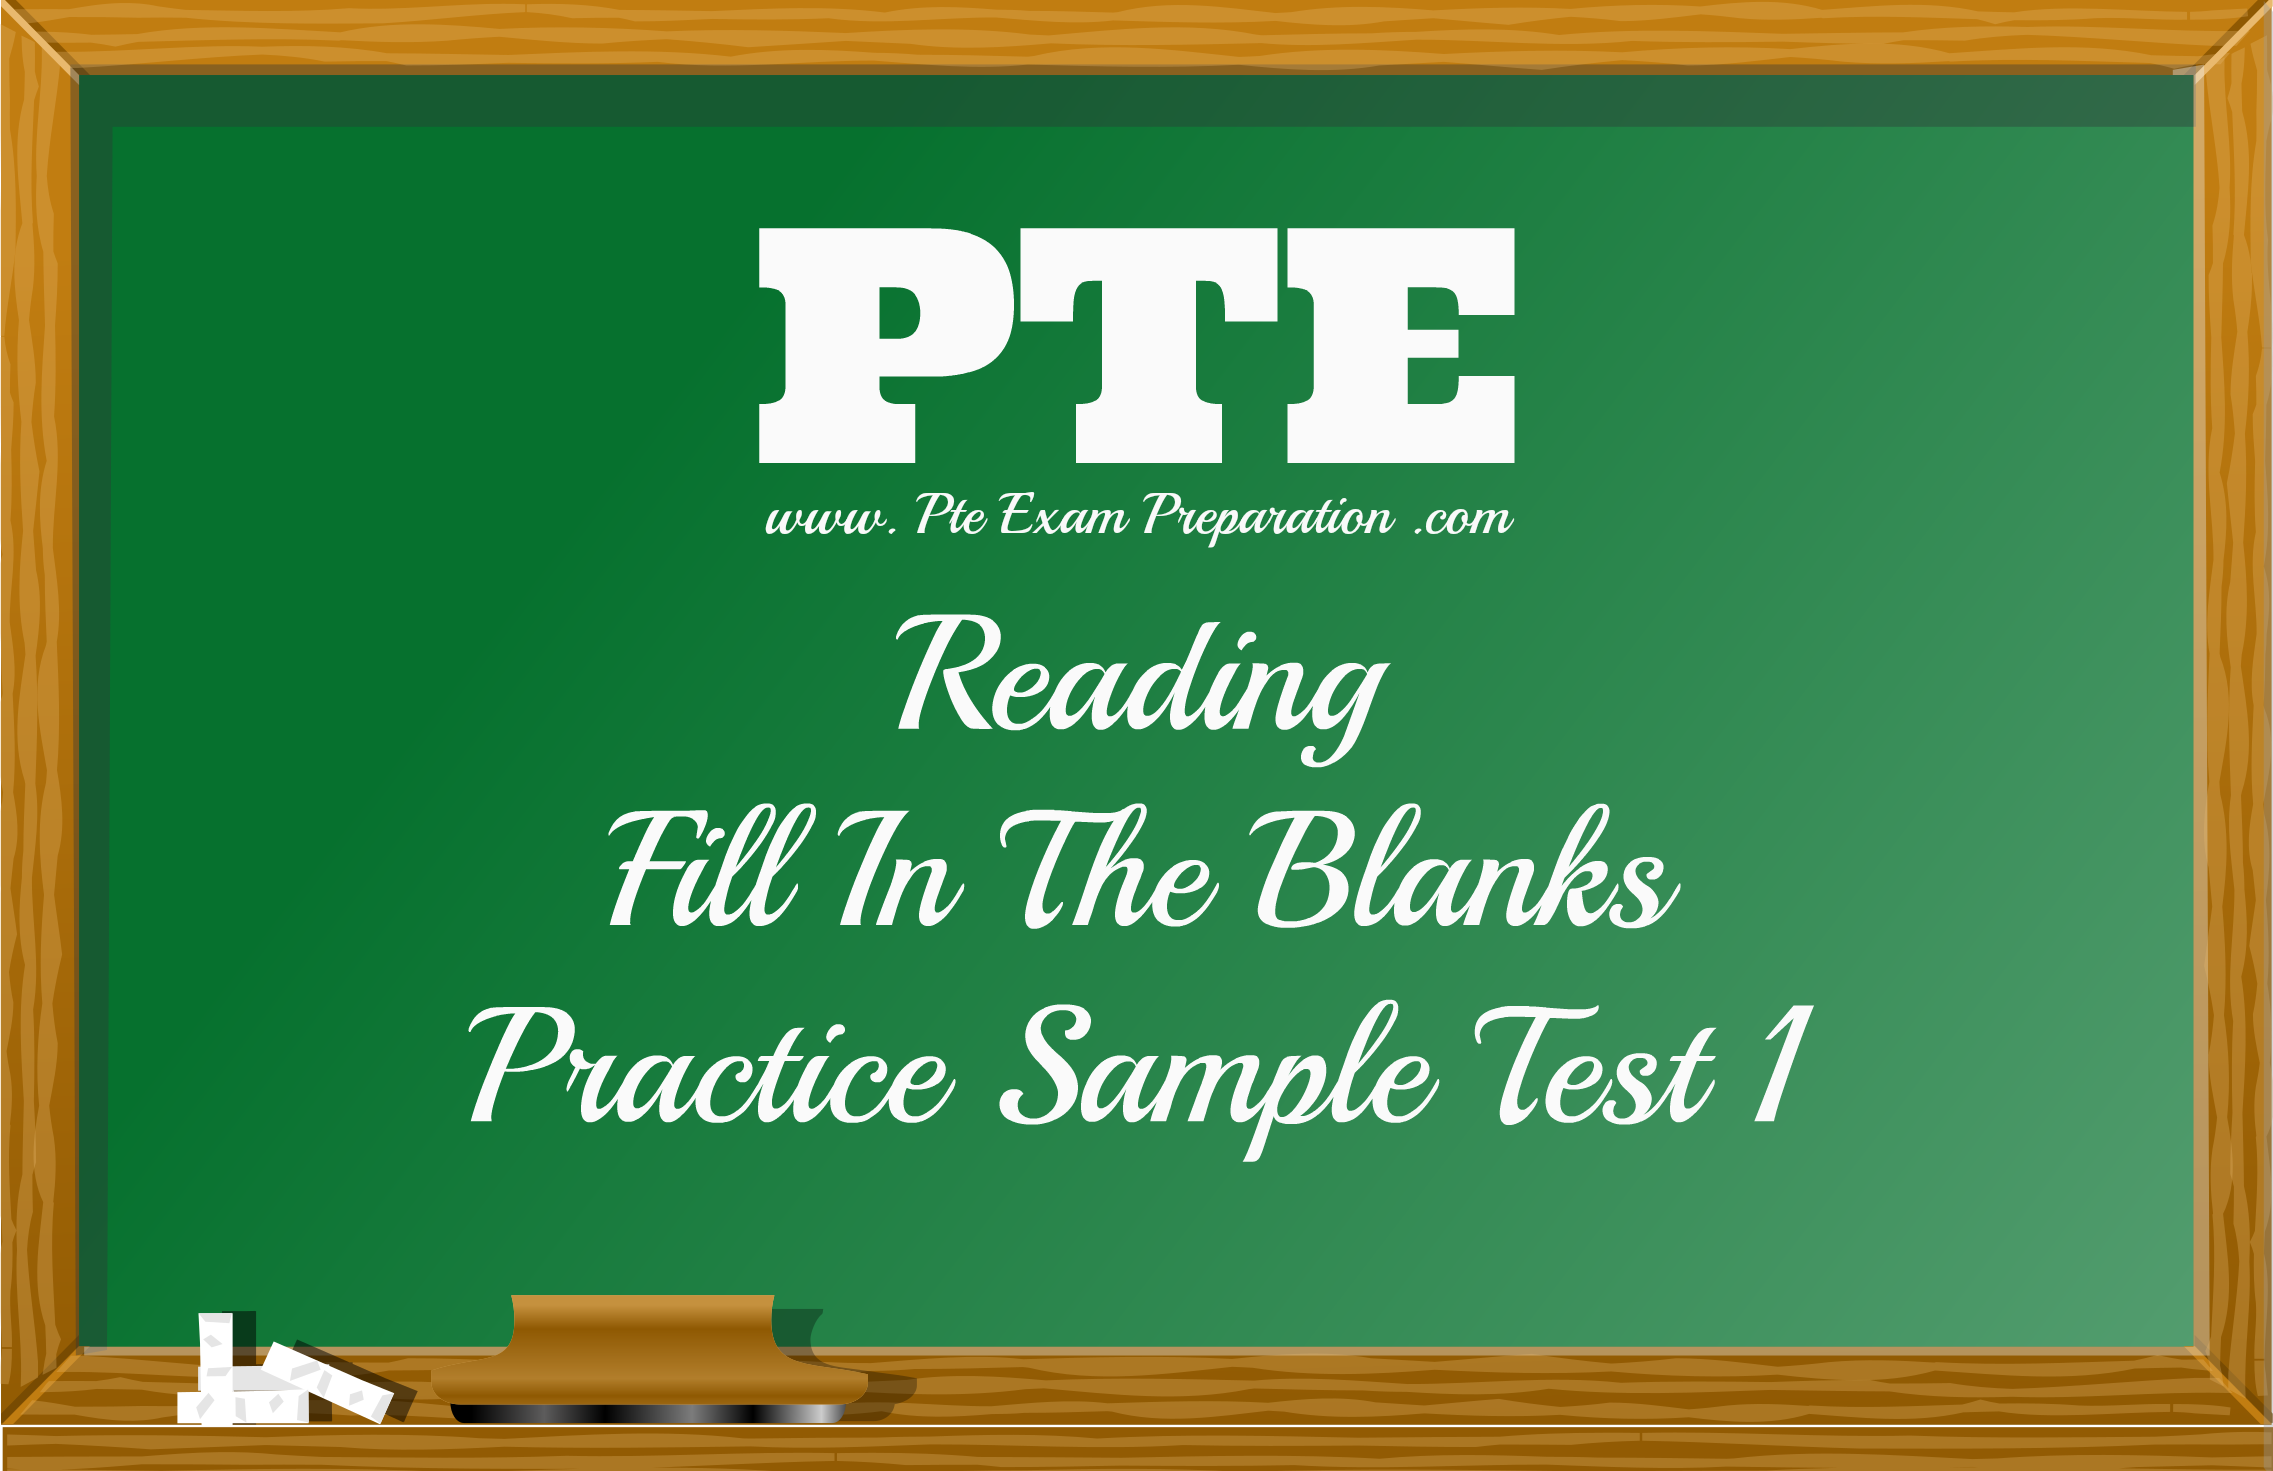 PTE Academic Reading Fill In The Blanks Practice Sample Test 1